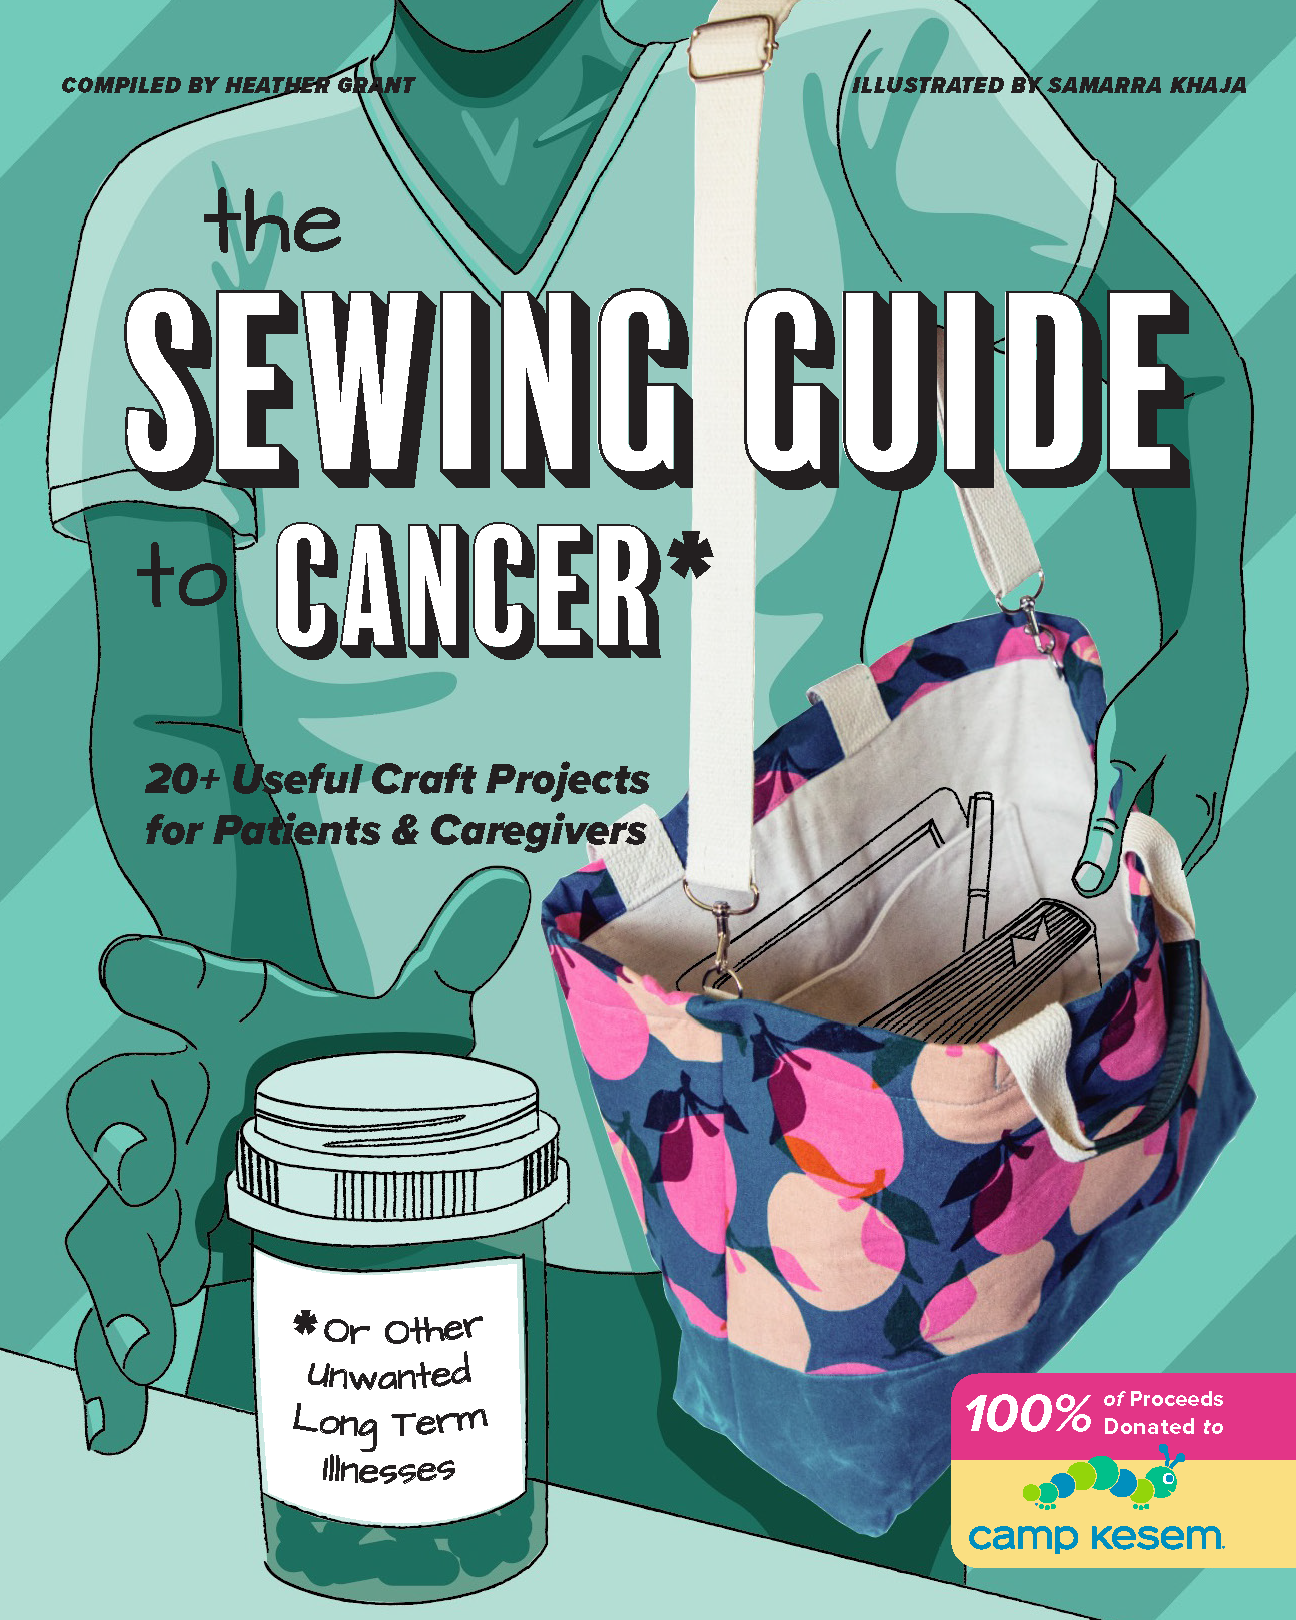 The Sewing Guide to cancer (or other very annoying long term illnesses)